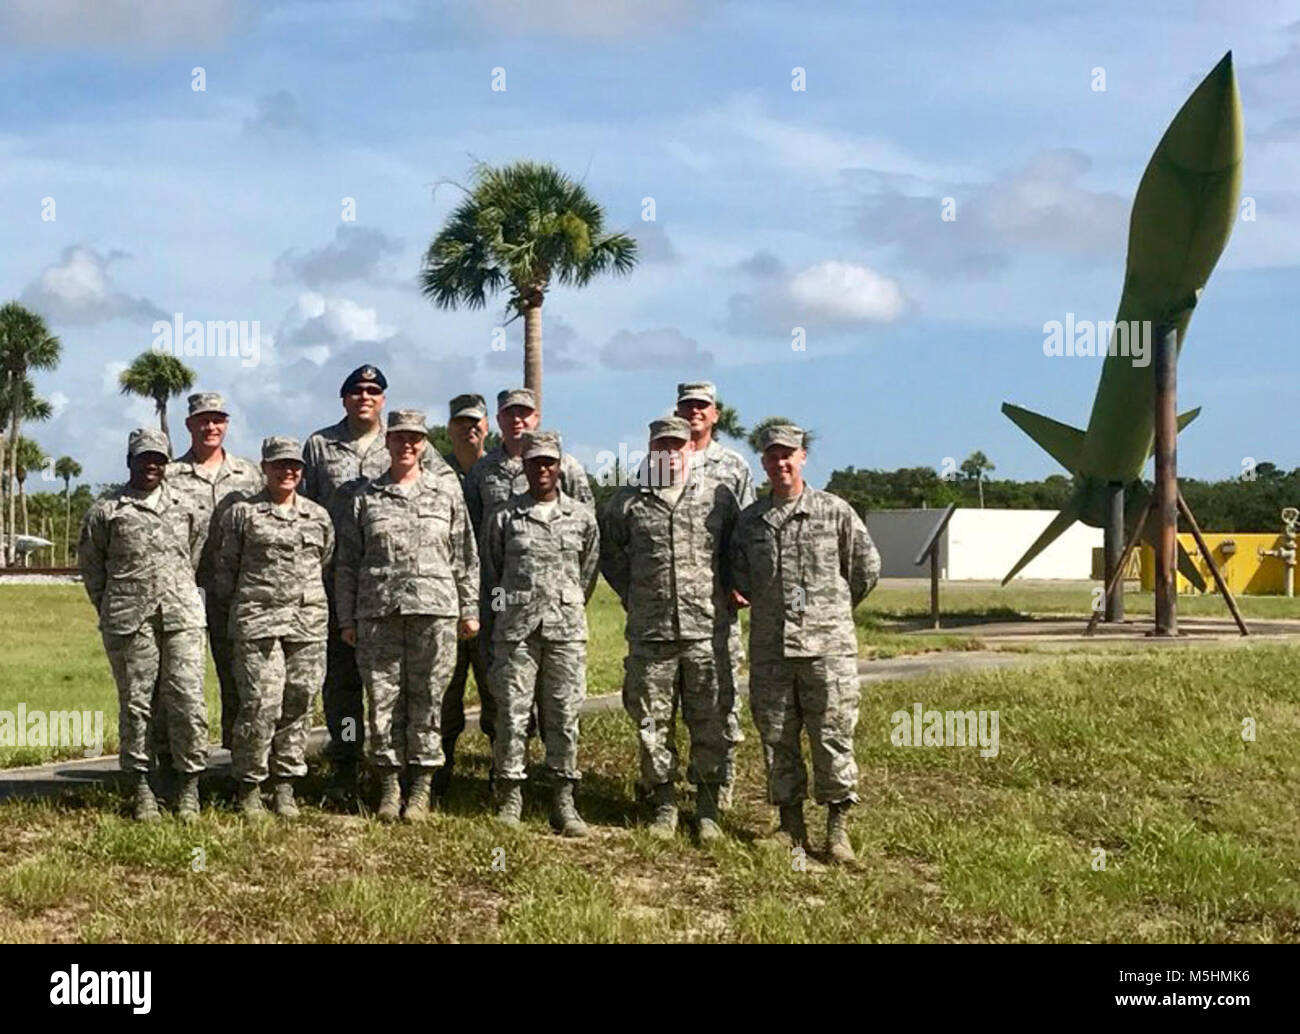 The Florida Air National Guard recruiting team, from left to right: Tech. Sgt. Tara Alina, Master Sgt. Earl Davis, Master Sgt. Amber Pinto, Master Sgt. Errol While, Senior Master Sgt. Rebekah Miller, Master Sgt Jeremy Hudson, Tech. Sgt. Tim Lyons, Master Sgt LaTisha Moulds, Tech. Sgt. Michael Graham, Master Sgt. Daniel Flores and Tech. Sgt. Brian Fletcher. Stock Photo